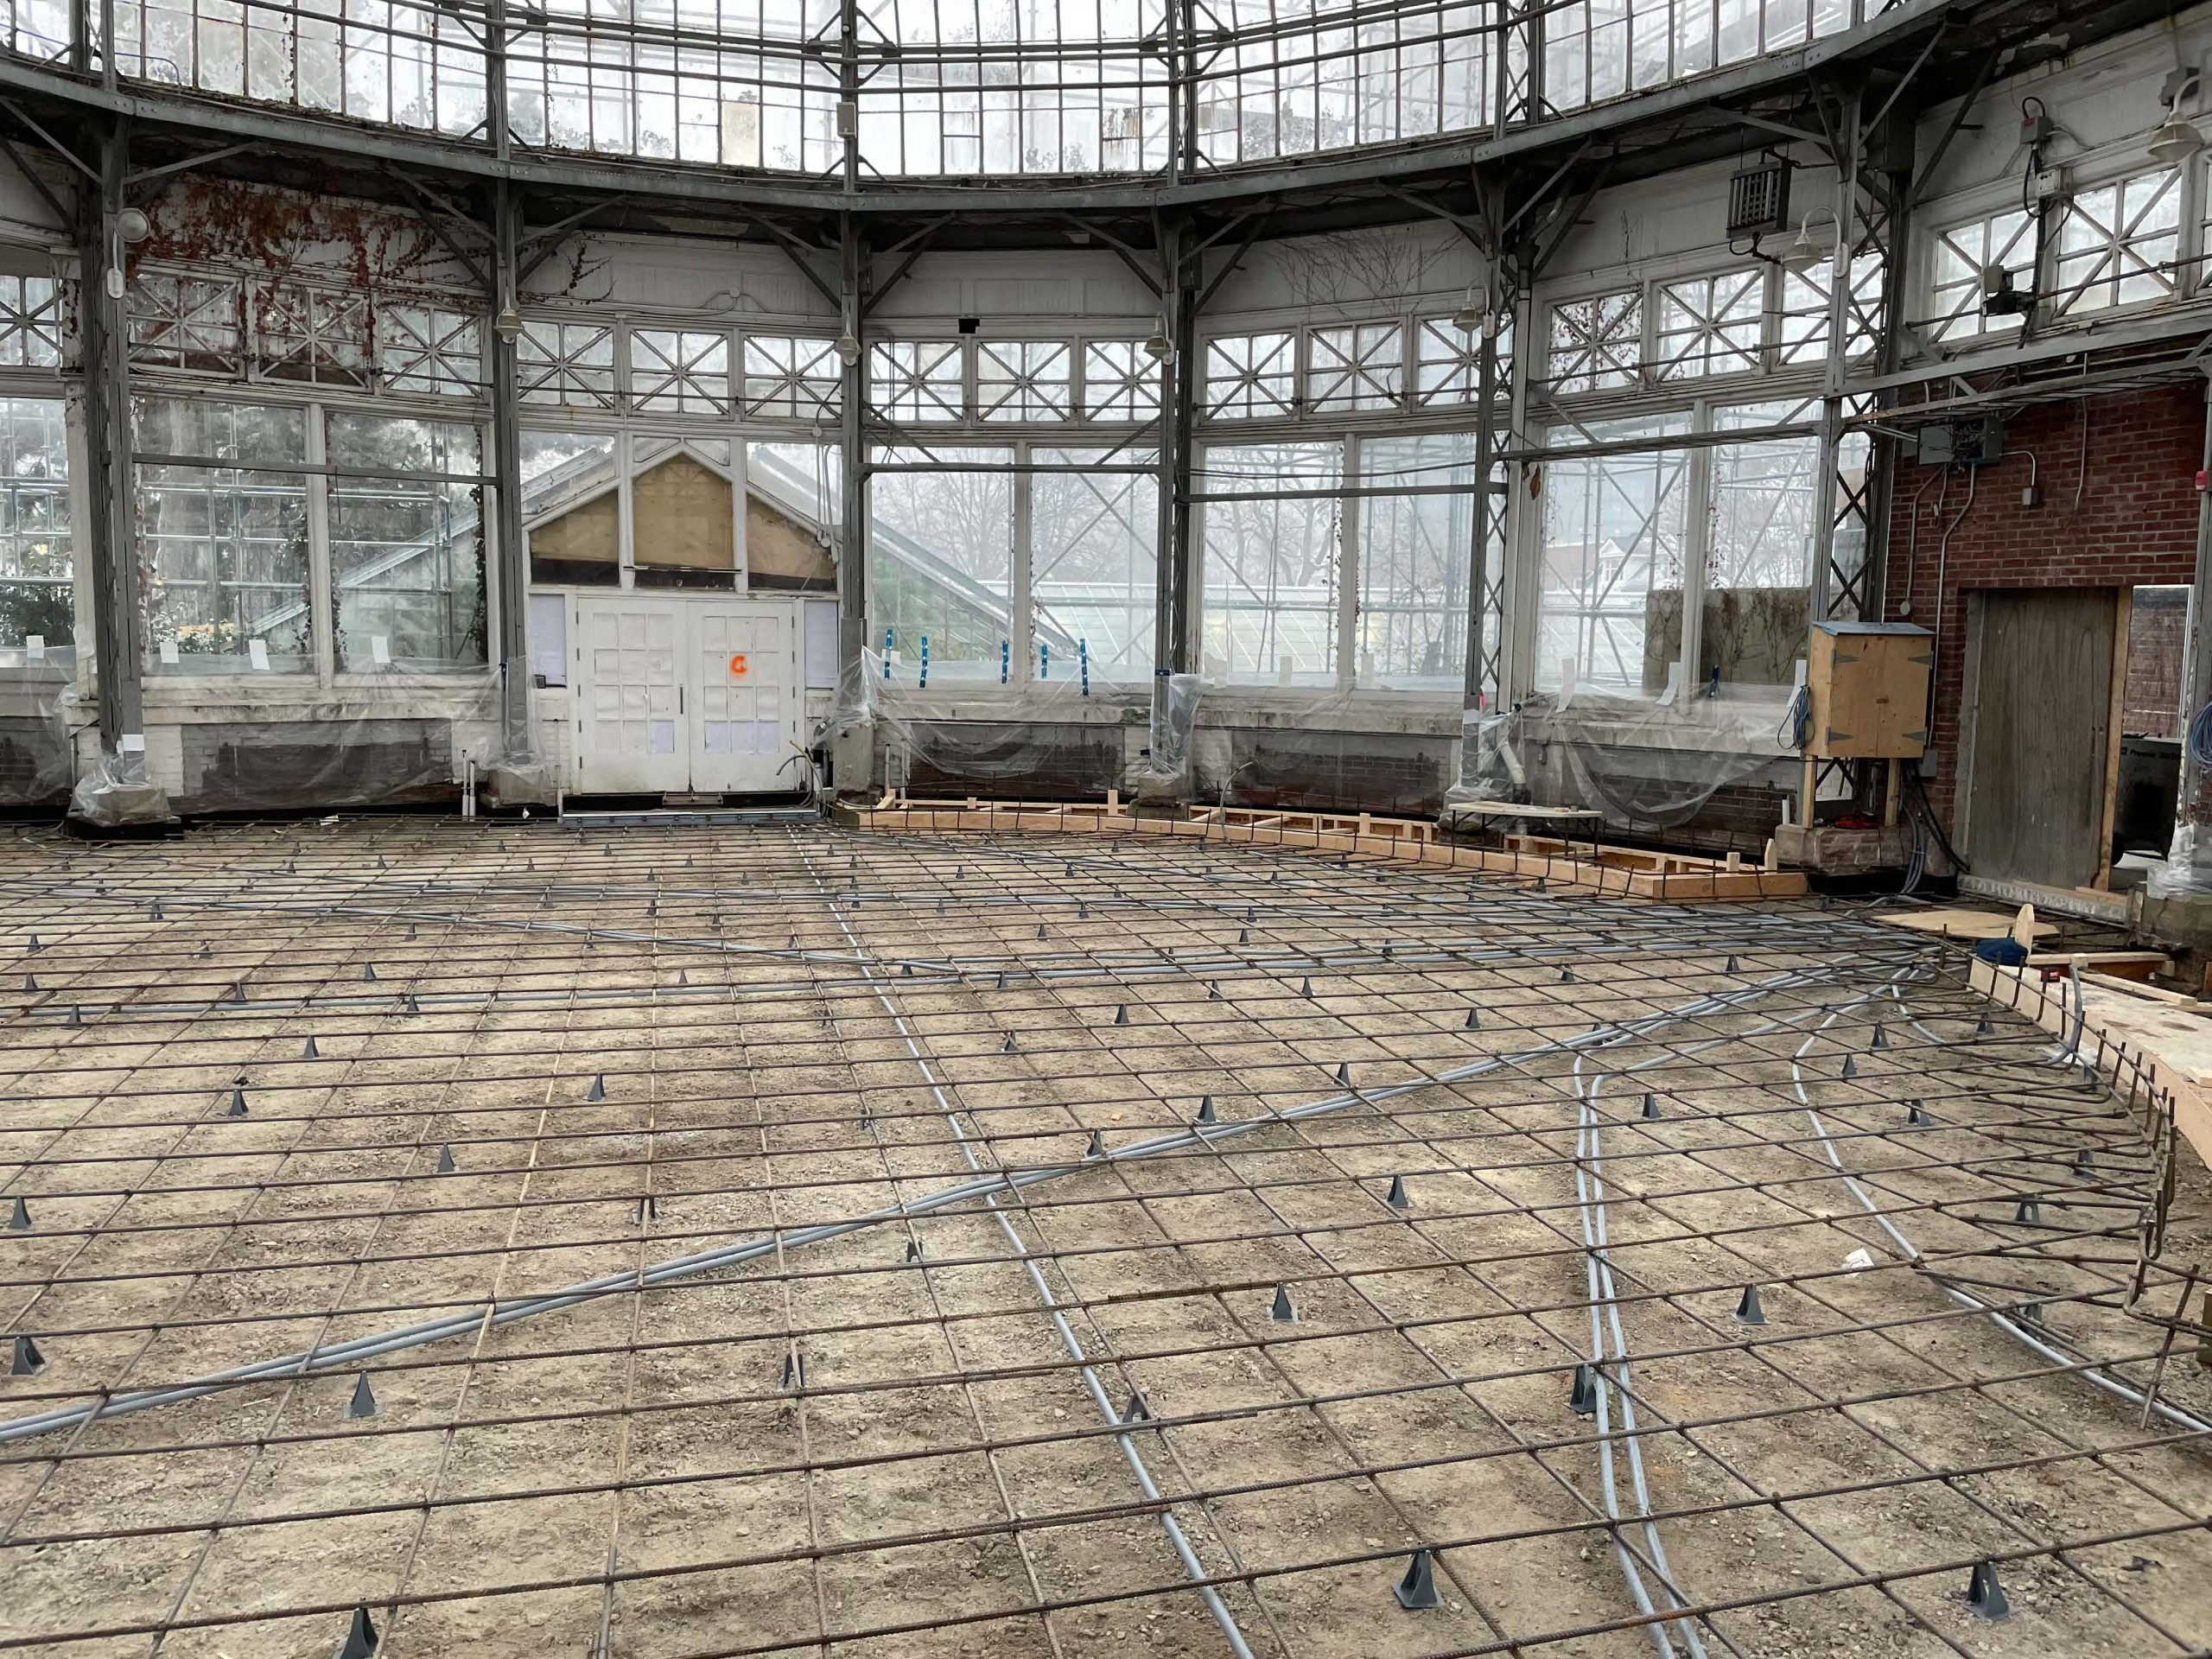 A photograph of the interior of the Palm House building taken from ground-level that shows a steel bar grid along the floor in preparation for concrete pouring. 